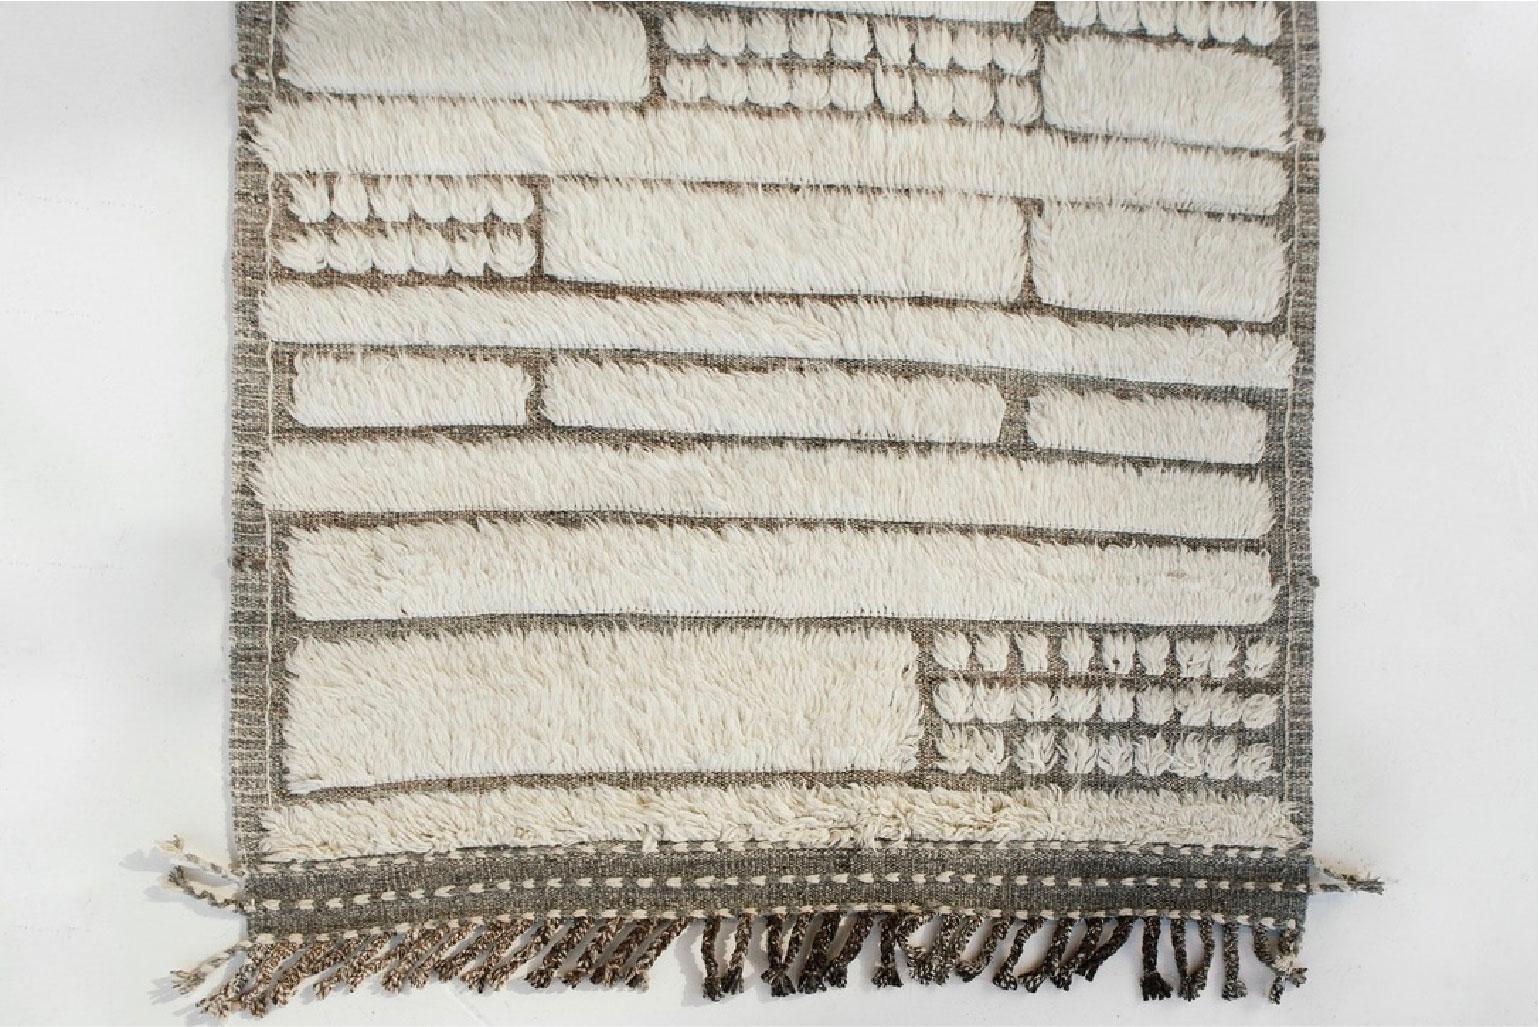 Katabatic is handwoven runner of natural grey/taupe flat-weave with the perfect shade of white shag; embossed detailing. Designed in Los Angeles with immense detail, Katabatic is meant to be lived on and can withstand high amounts of foot